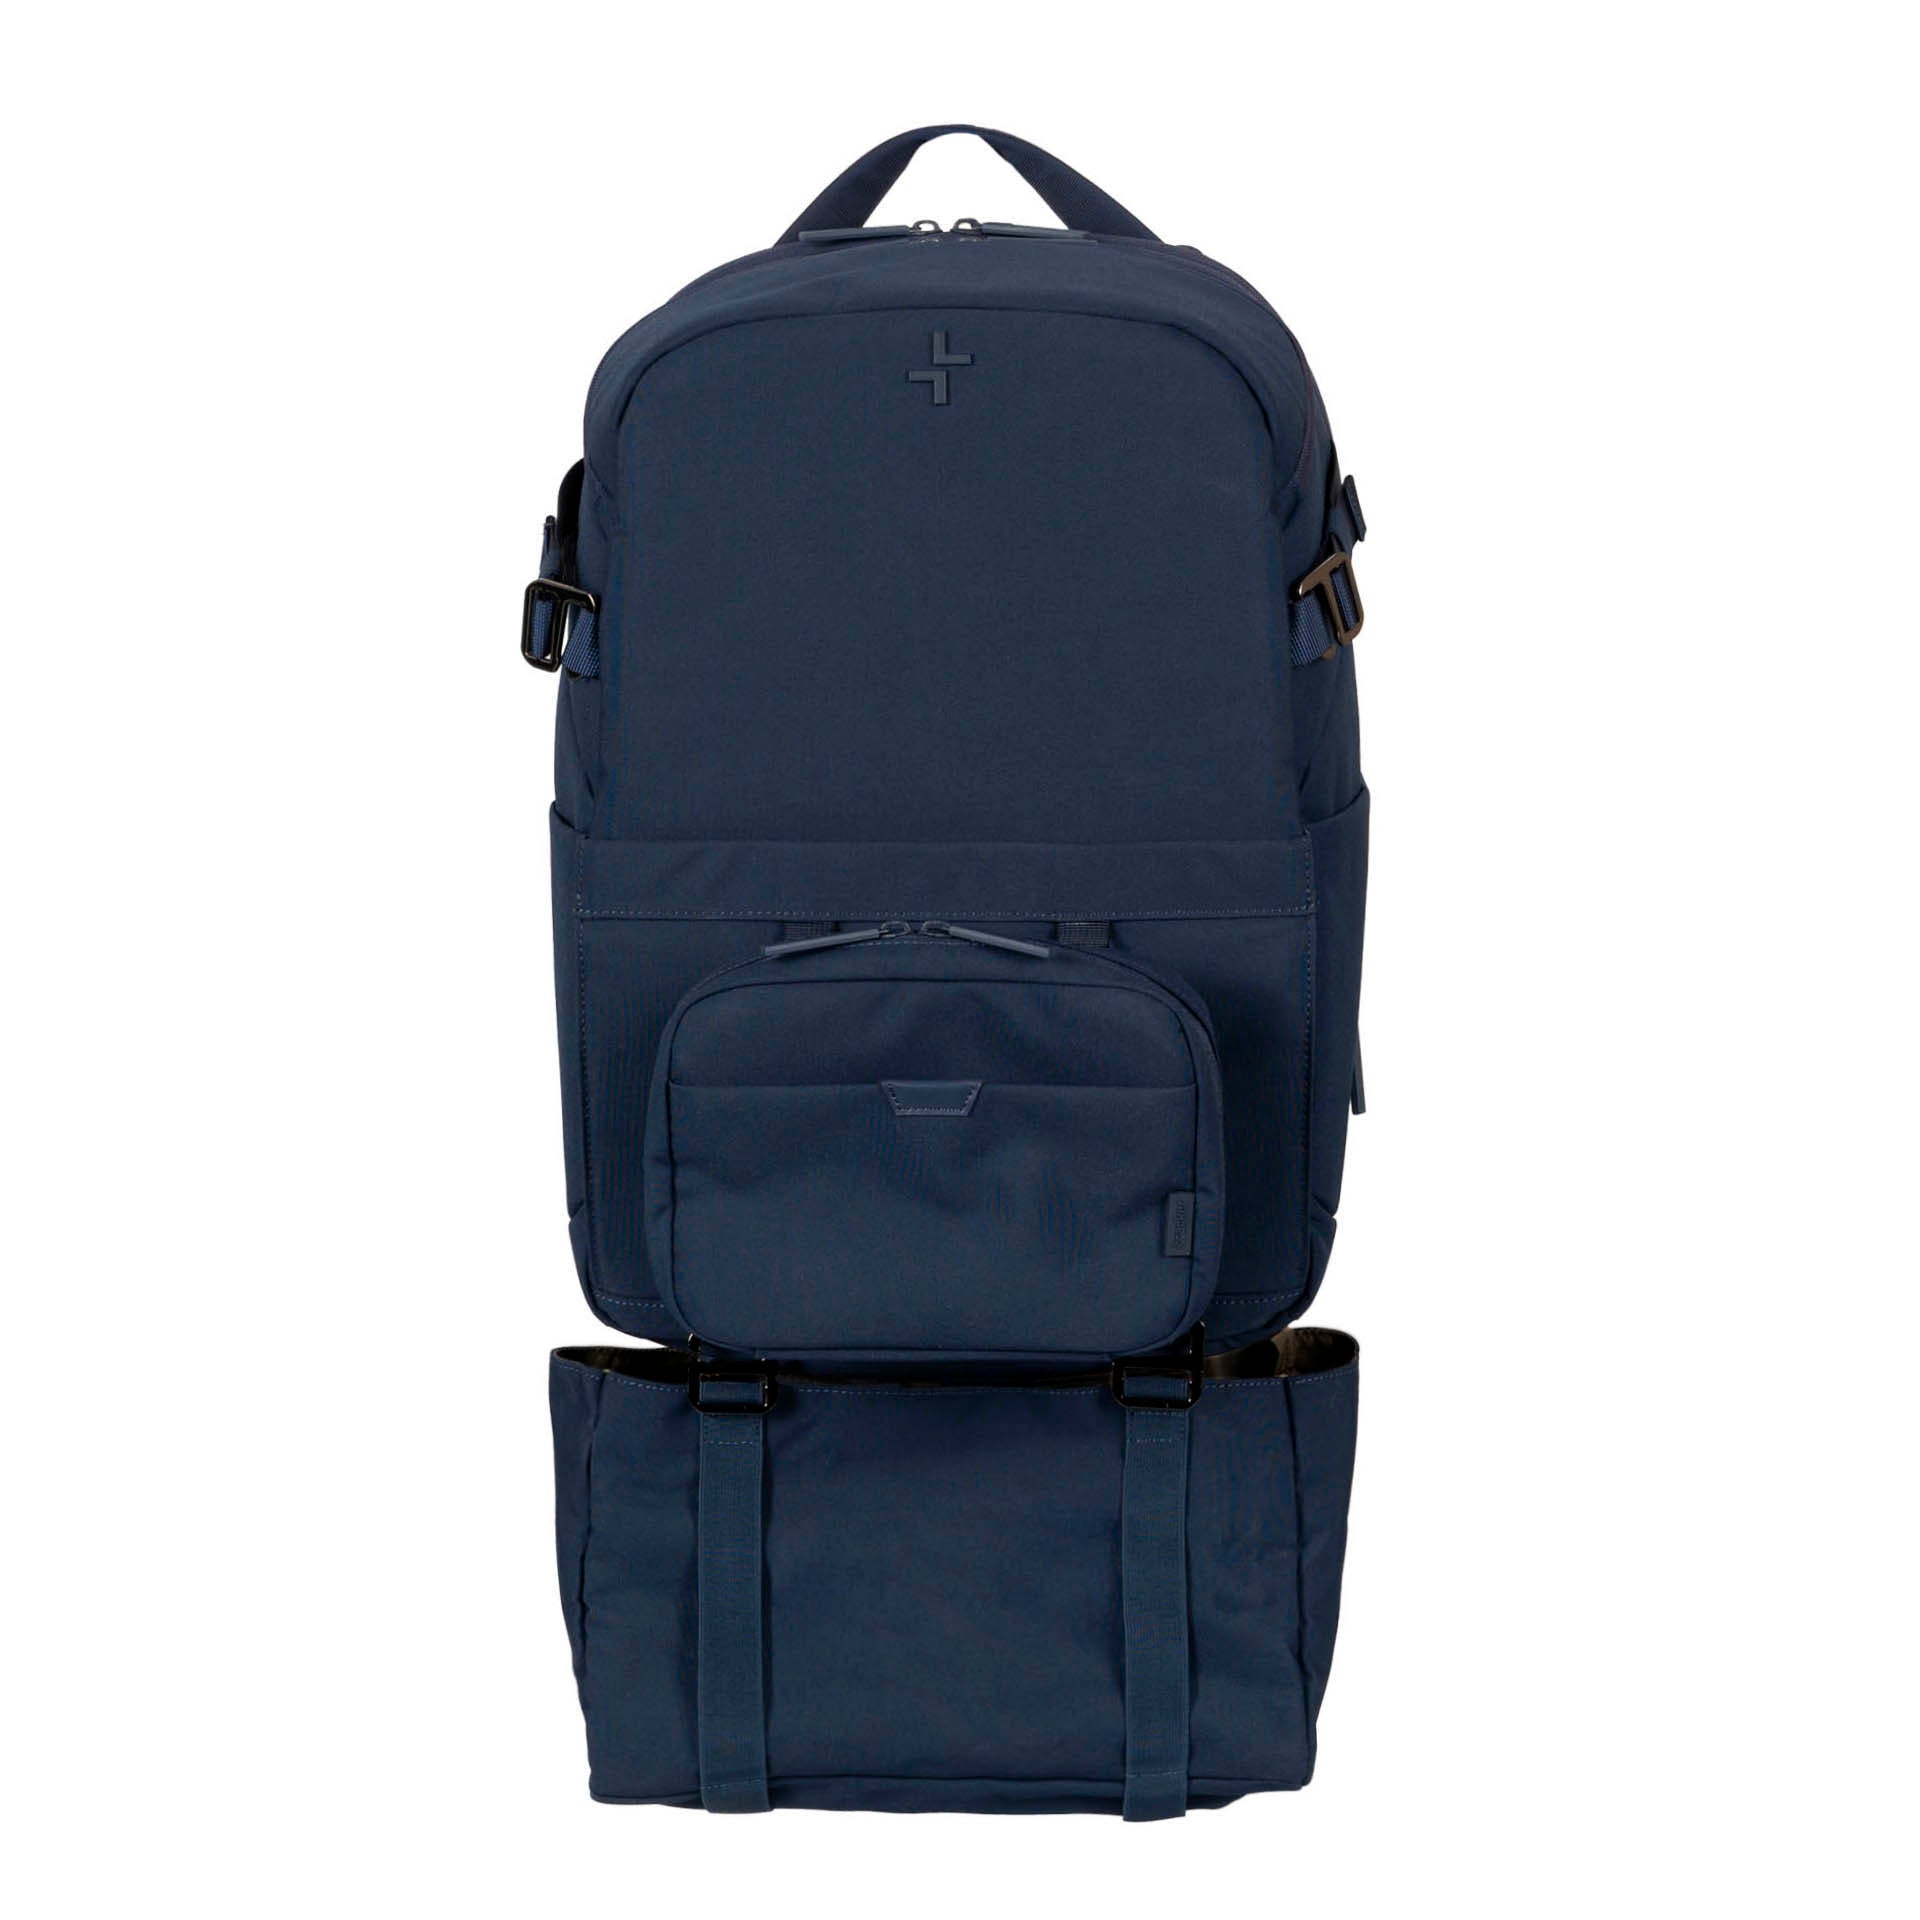 The 5 Continents 2.0 Backpack